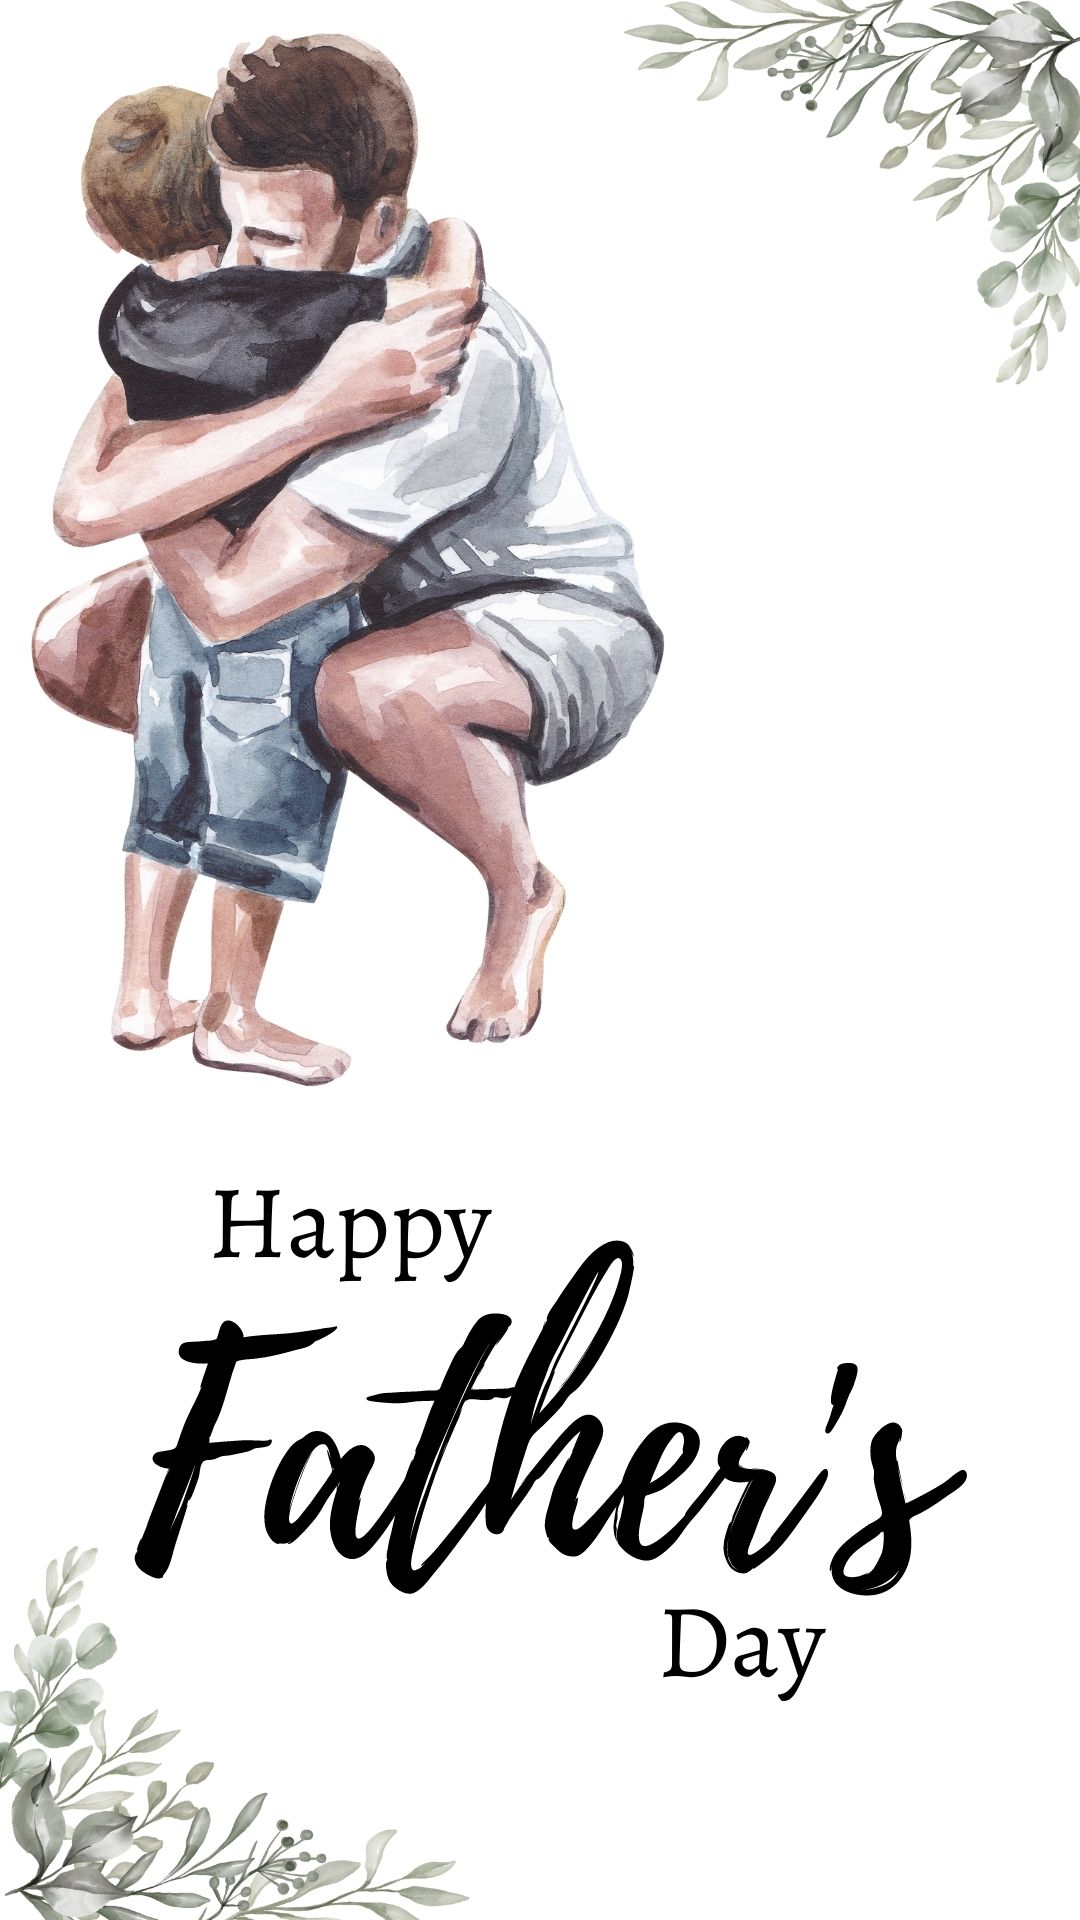 best happy father's day wishes images for instagram story (11)